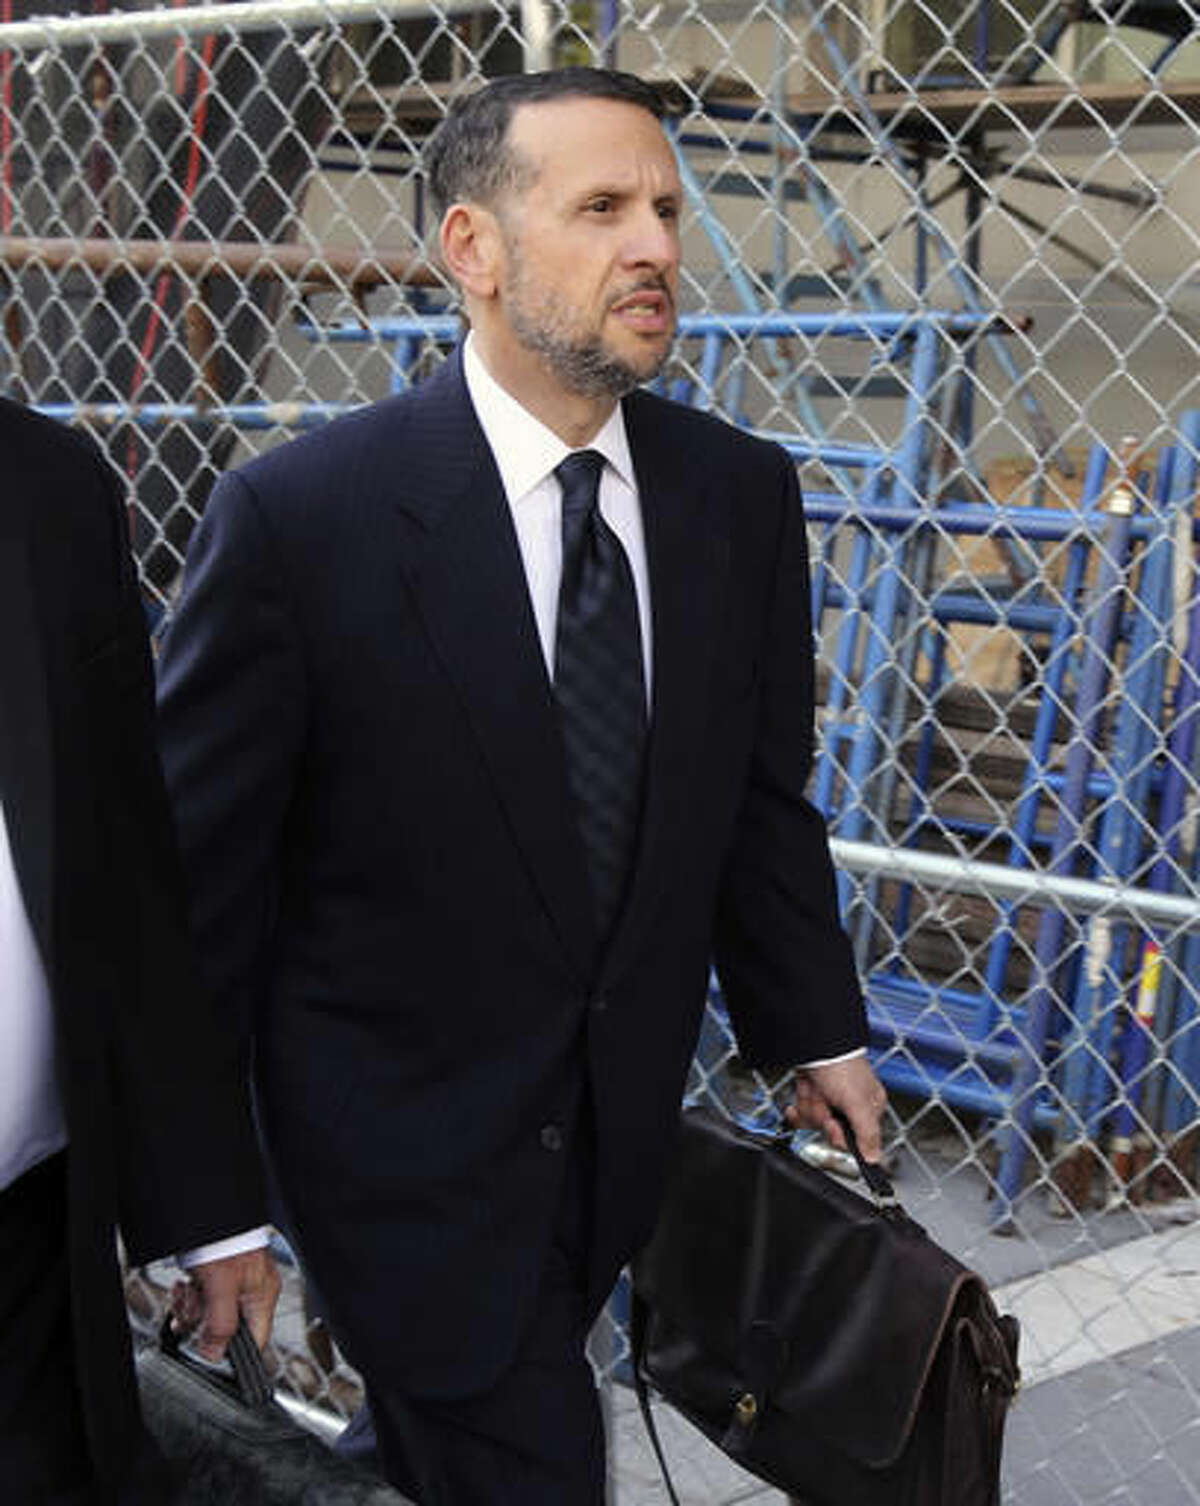 FILE - In a Friday, Sept. 23, 2016 file photo, David Wildstein arrives at the federal courthouse, in Newark, N.J. Wildstein testified Tuesday, Oct. 4, 2016, that New Jersey Gov. Chris Christie and New York Gov. Andrew Cuomo discussed releasing a false report to tamp down questions over the George Washington Bridge lane-closure scandal. (Chris Pedota/The Record via AP, File)